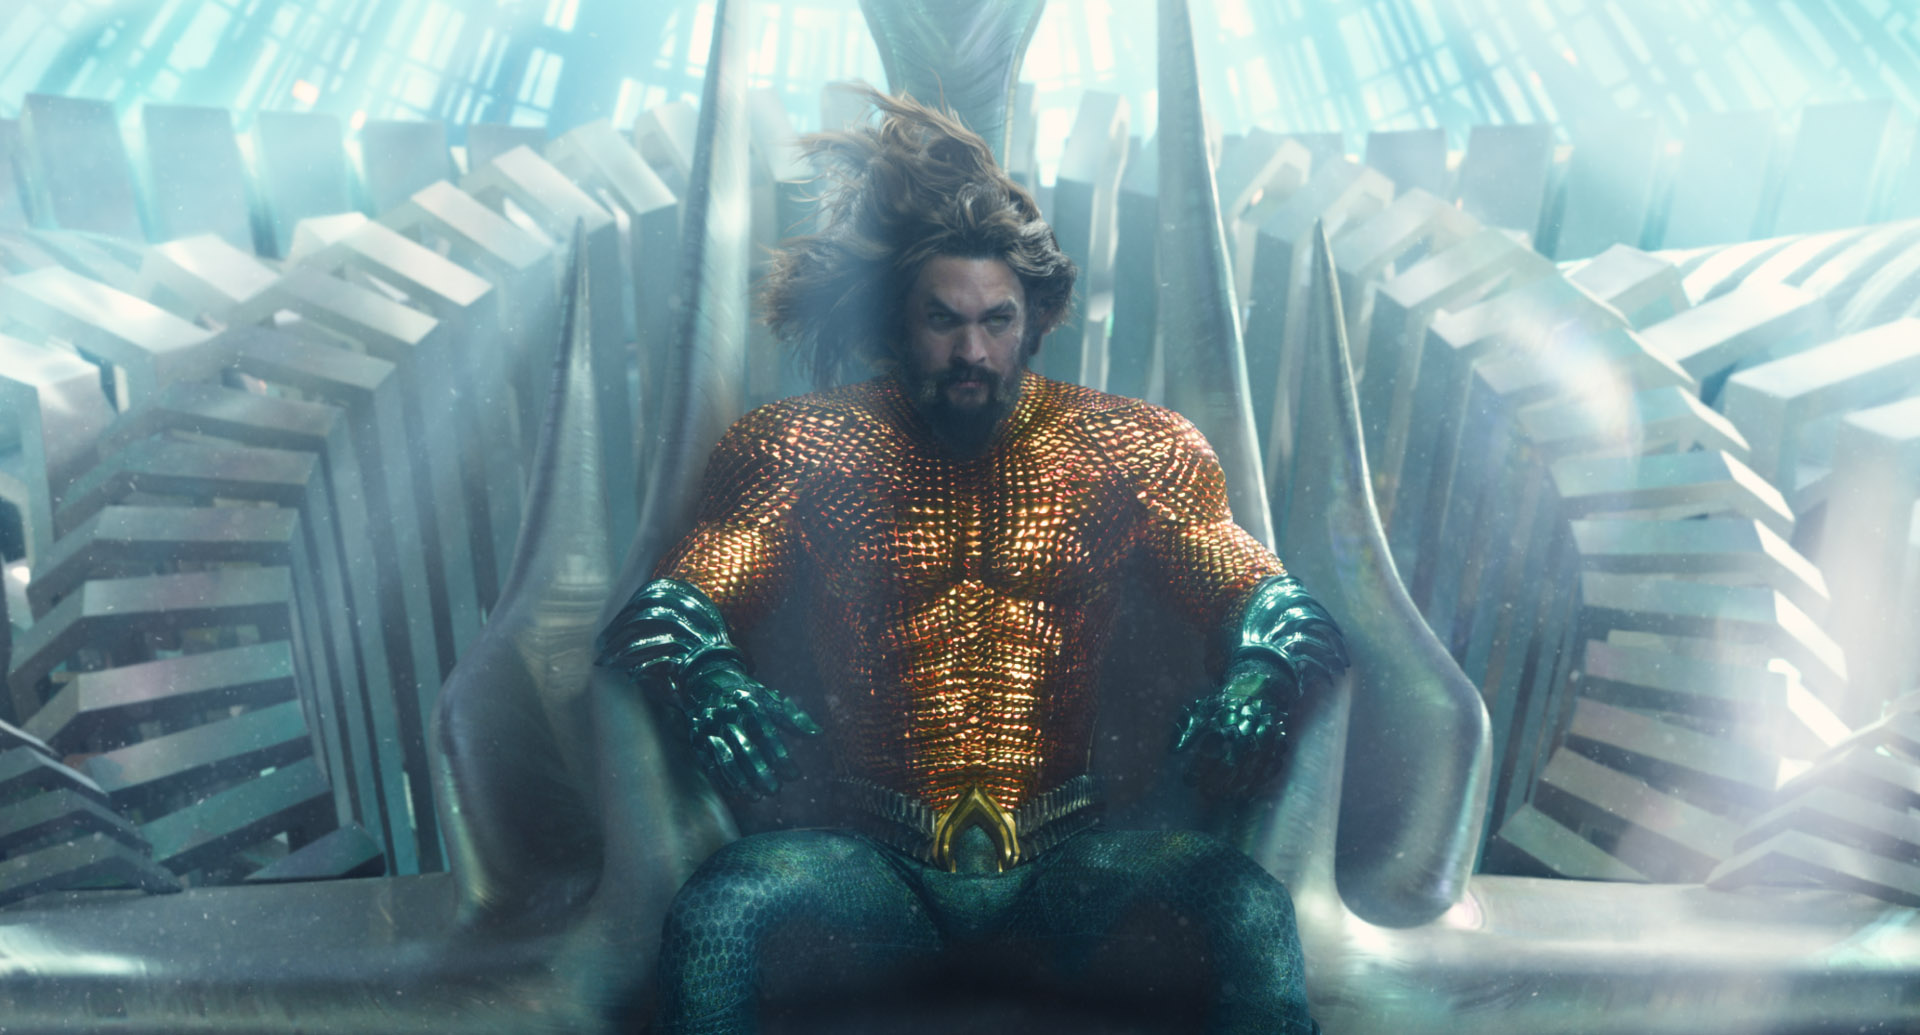 Aquaman sits on a throne in the water